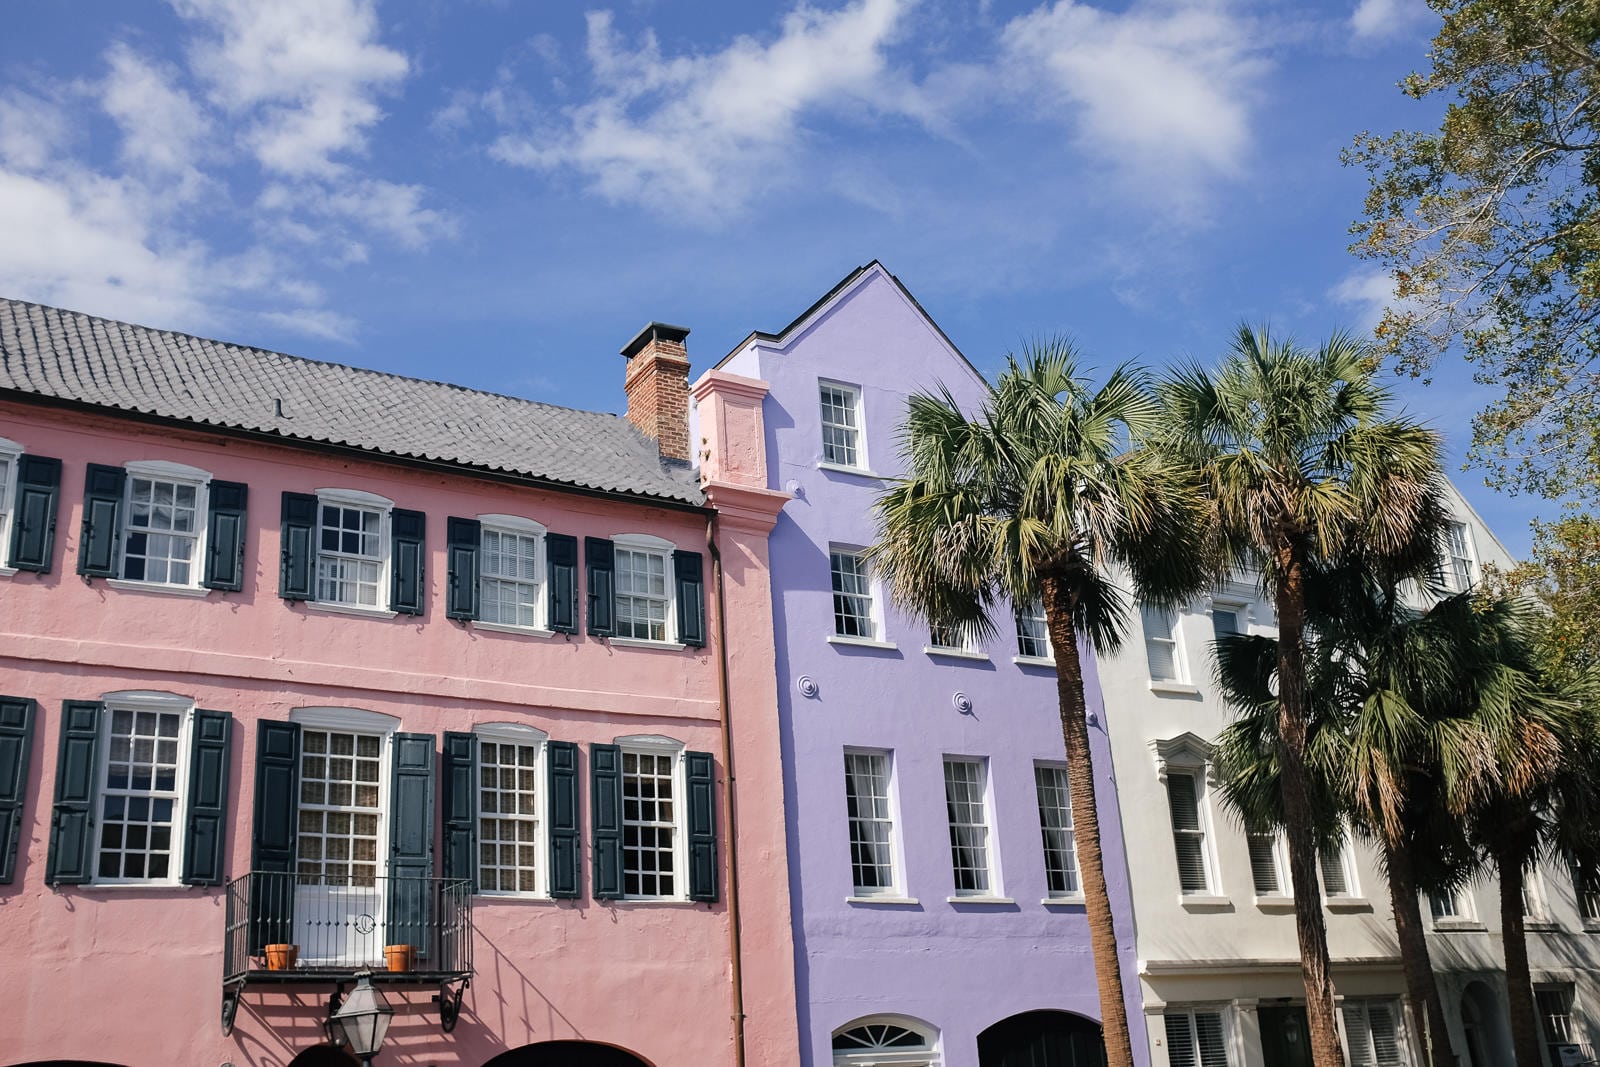 5 things to do in Charleston, SC | The Girl From Panama @pamhetlinger